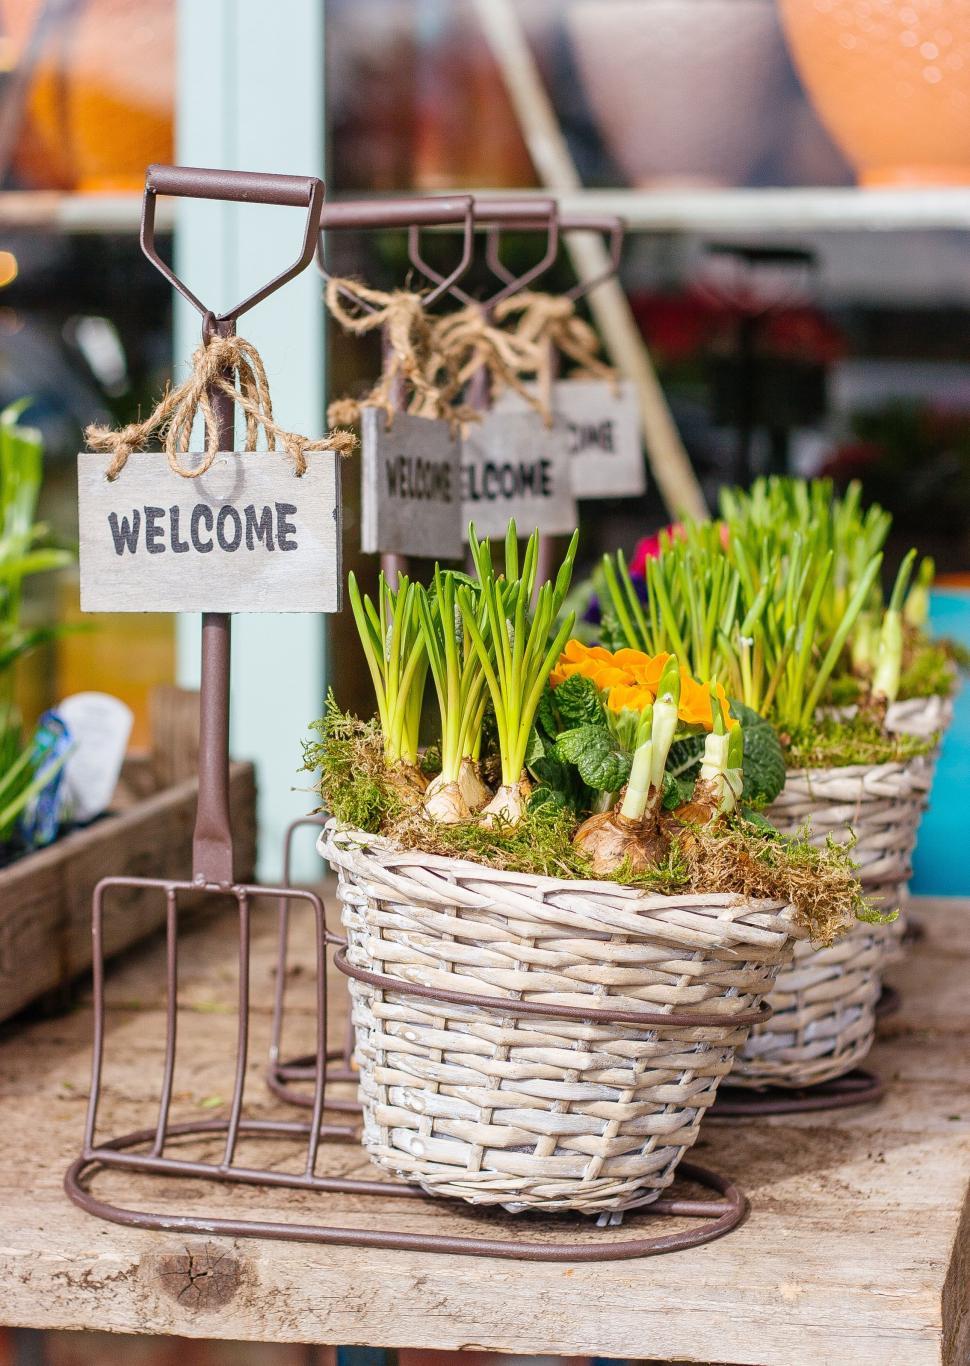 Free Image of Table With Baskets of Vegetables and Welcome Sign 